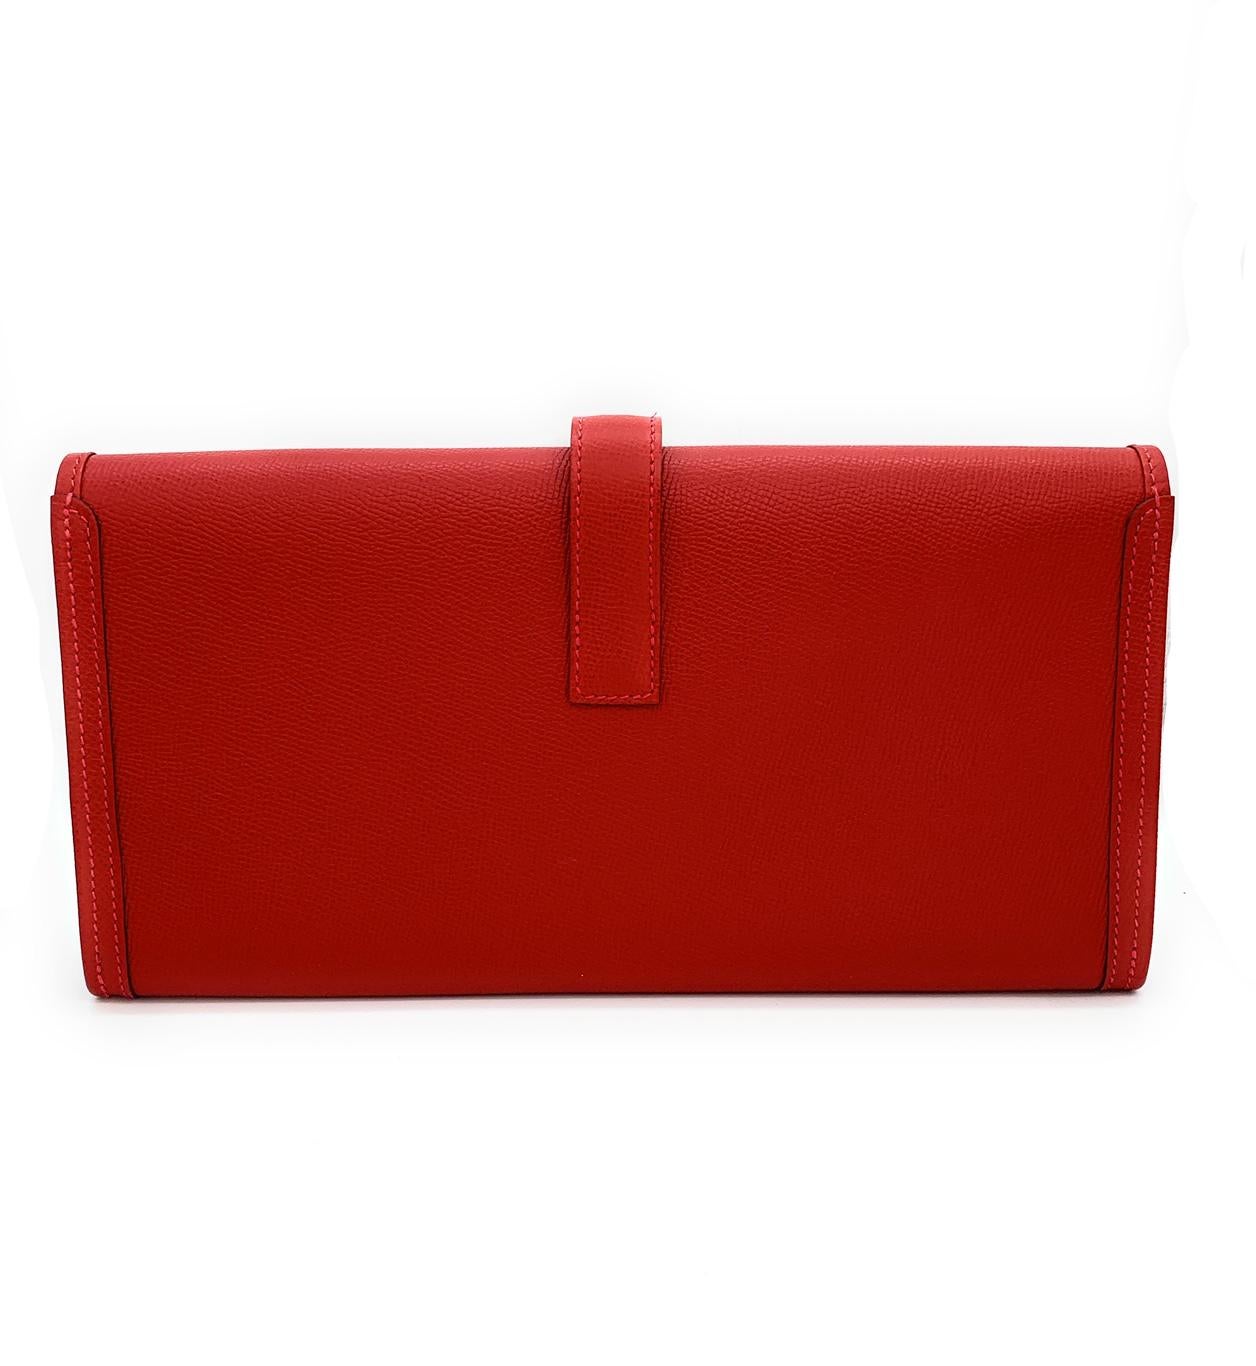 This gorgeous Hermès Jige Elan 29 Red Epsom Leather Clutch is the most elegant way to organize your essentials like your cash, currency, credit cards and is great for a night out. It features gorgeous Swift leather in a stunning Rouge color with a